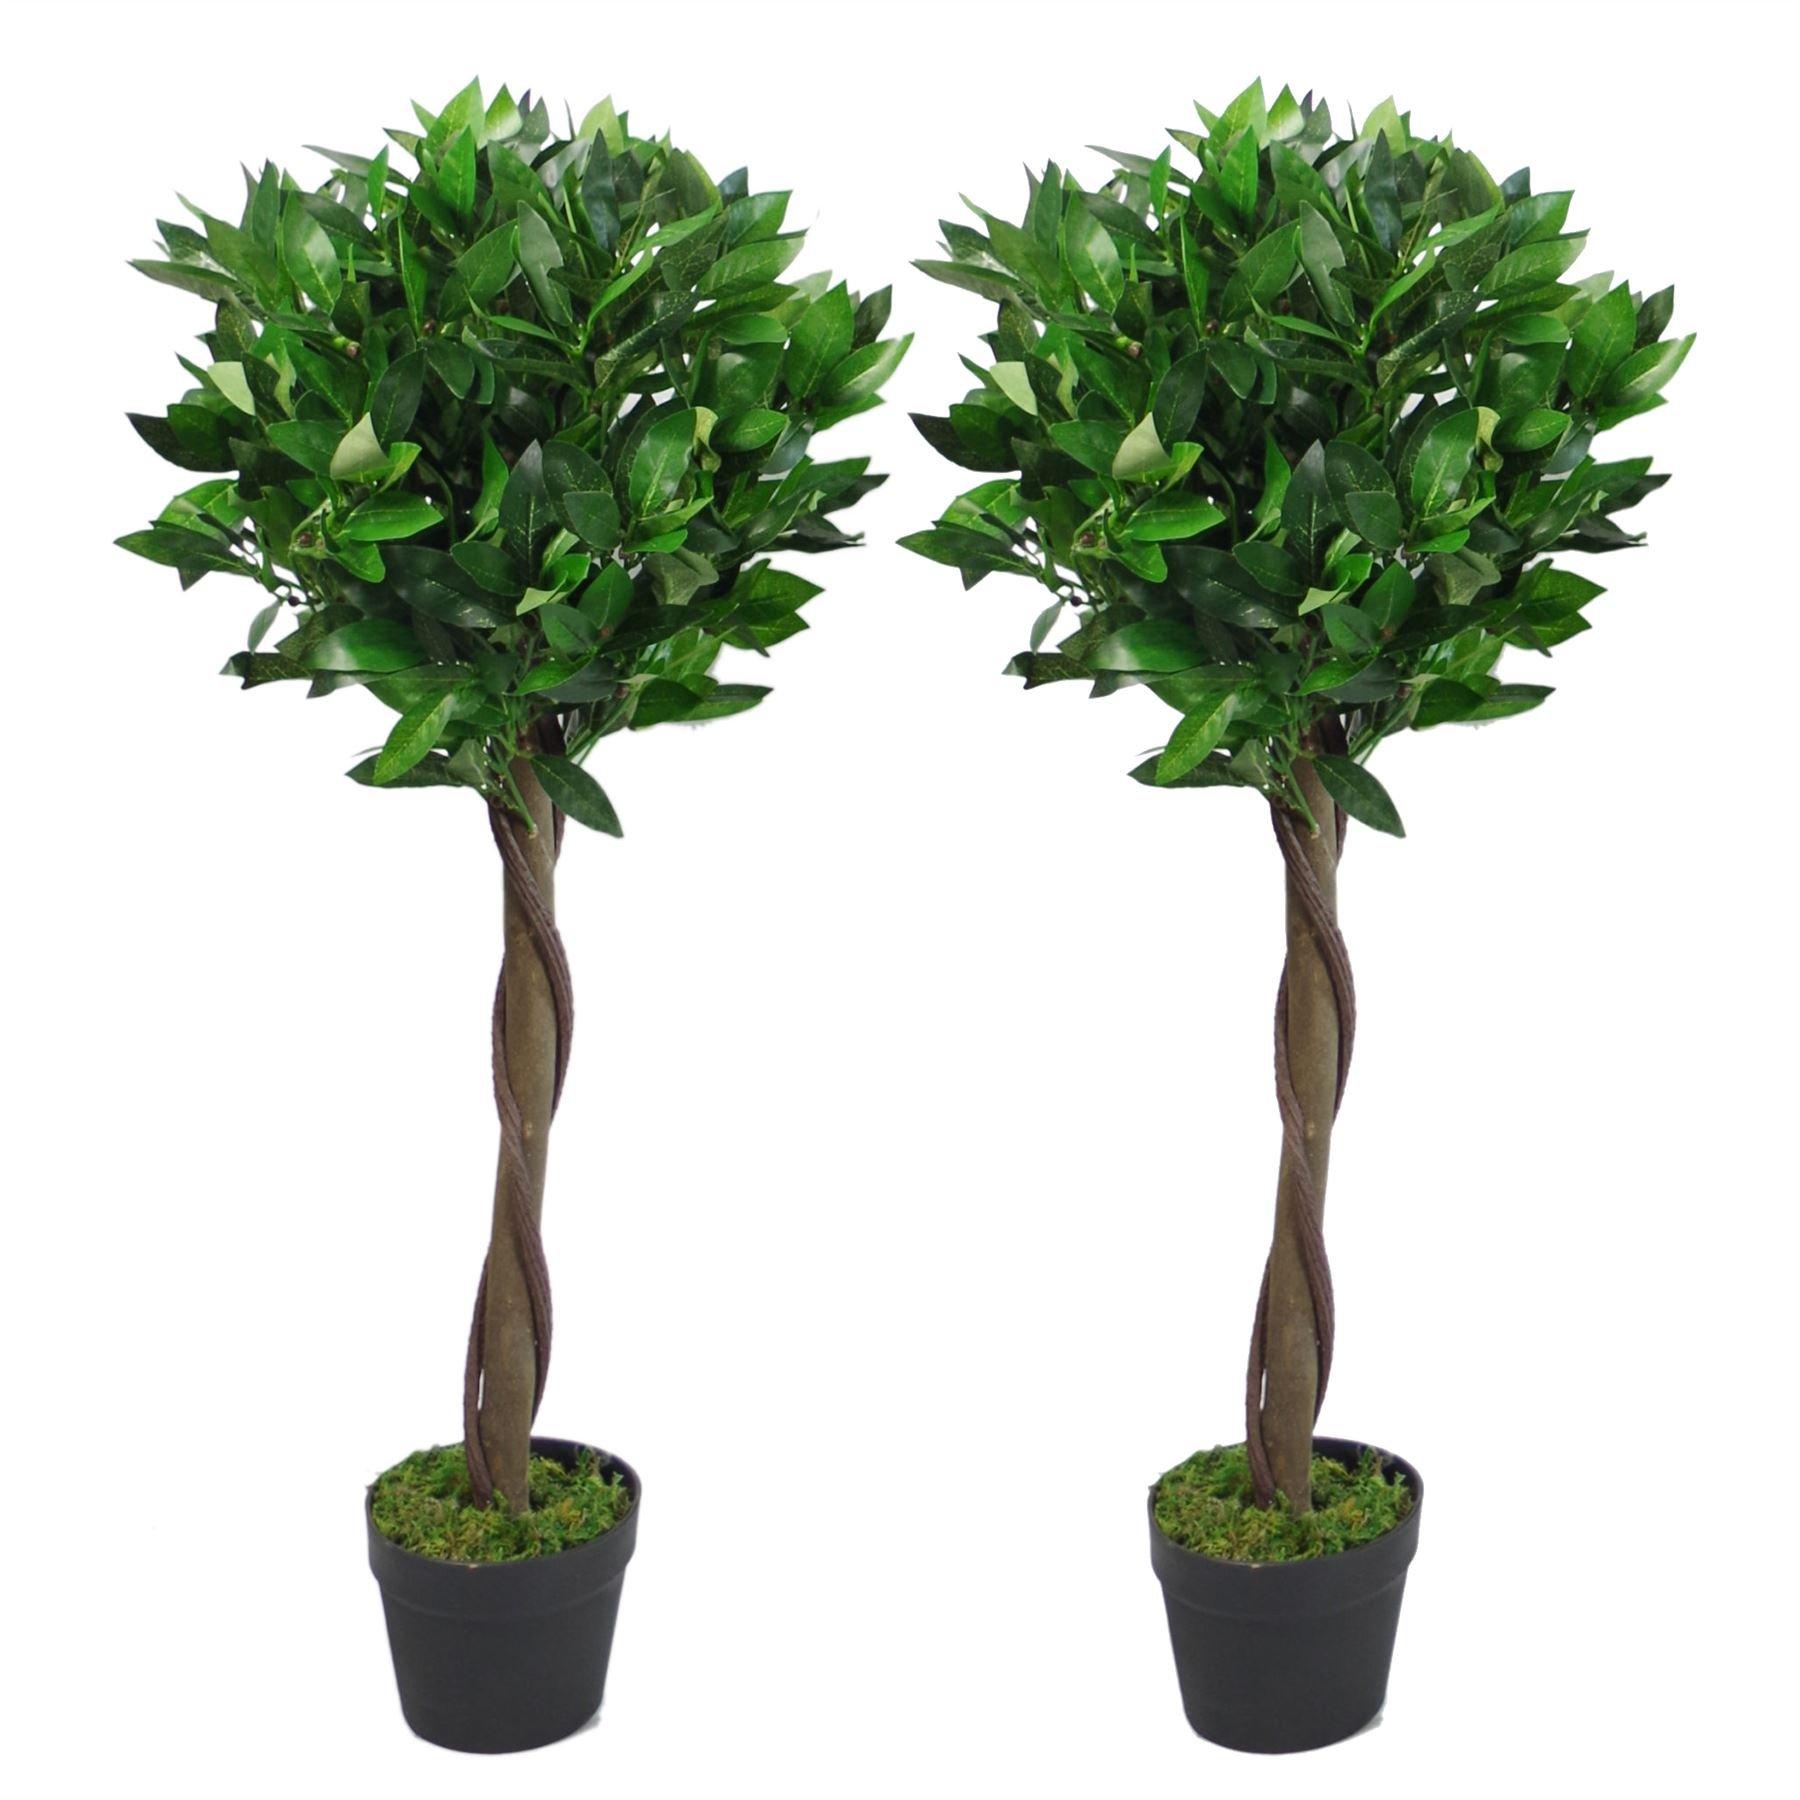 Pair of 90cm (3ft) Twisted Stem Artificial Topiary Bay Laurel Ball Trees